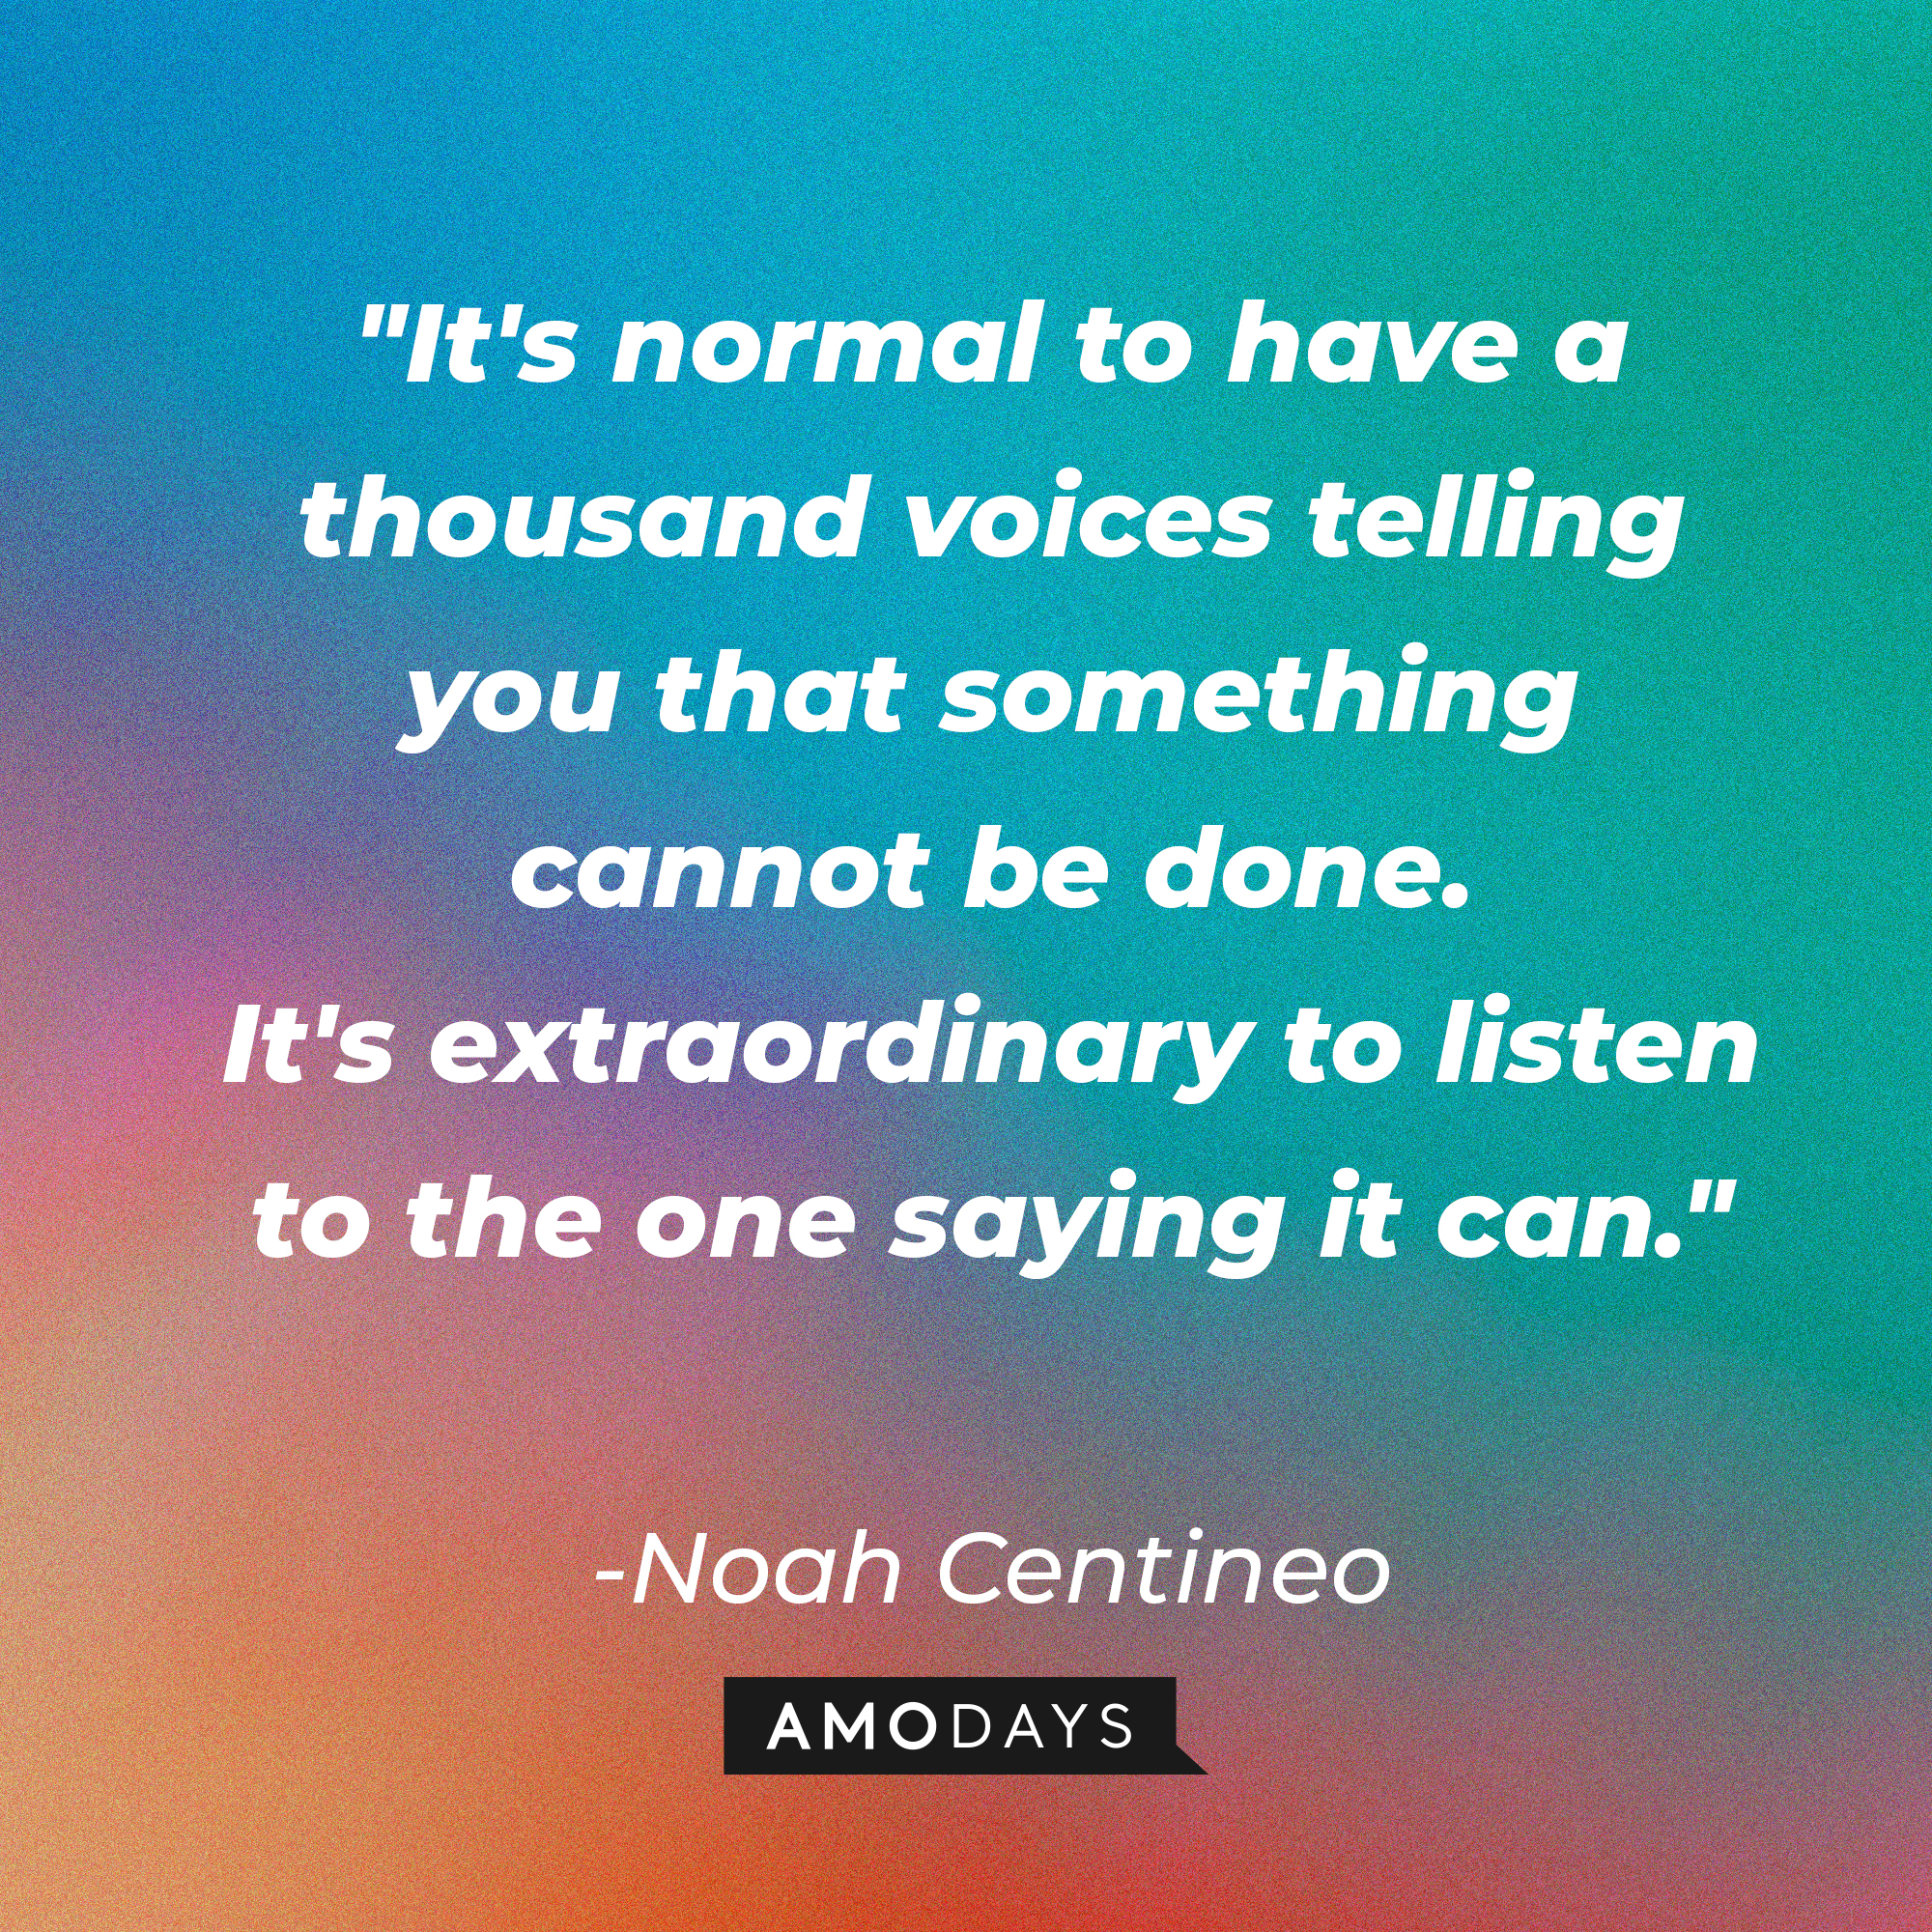 Noah Centineo's quote: "It's normal to have a thousand voices telling you that something cannot be done. It's extraordinary to listen to the one saying it can." | Image: AmoDays